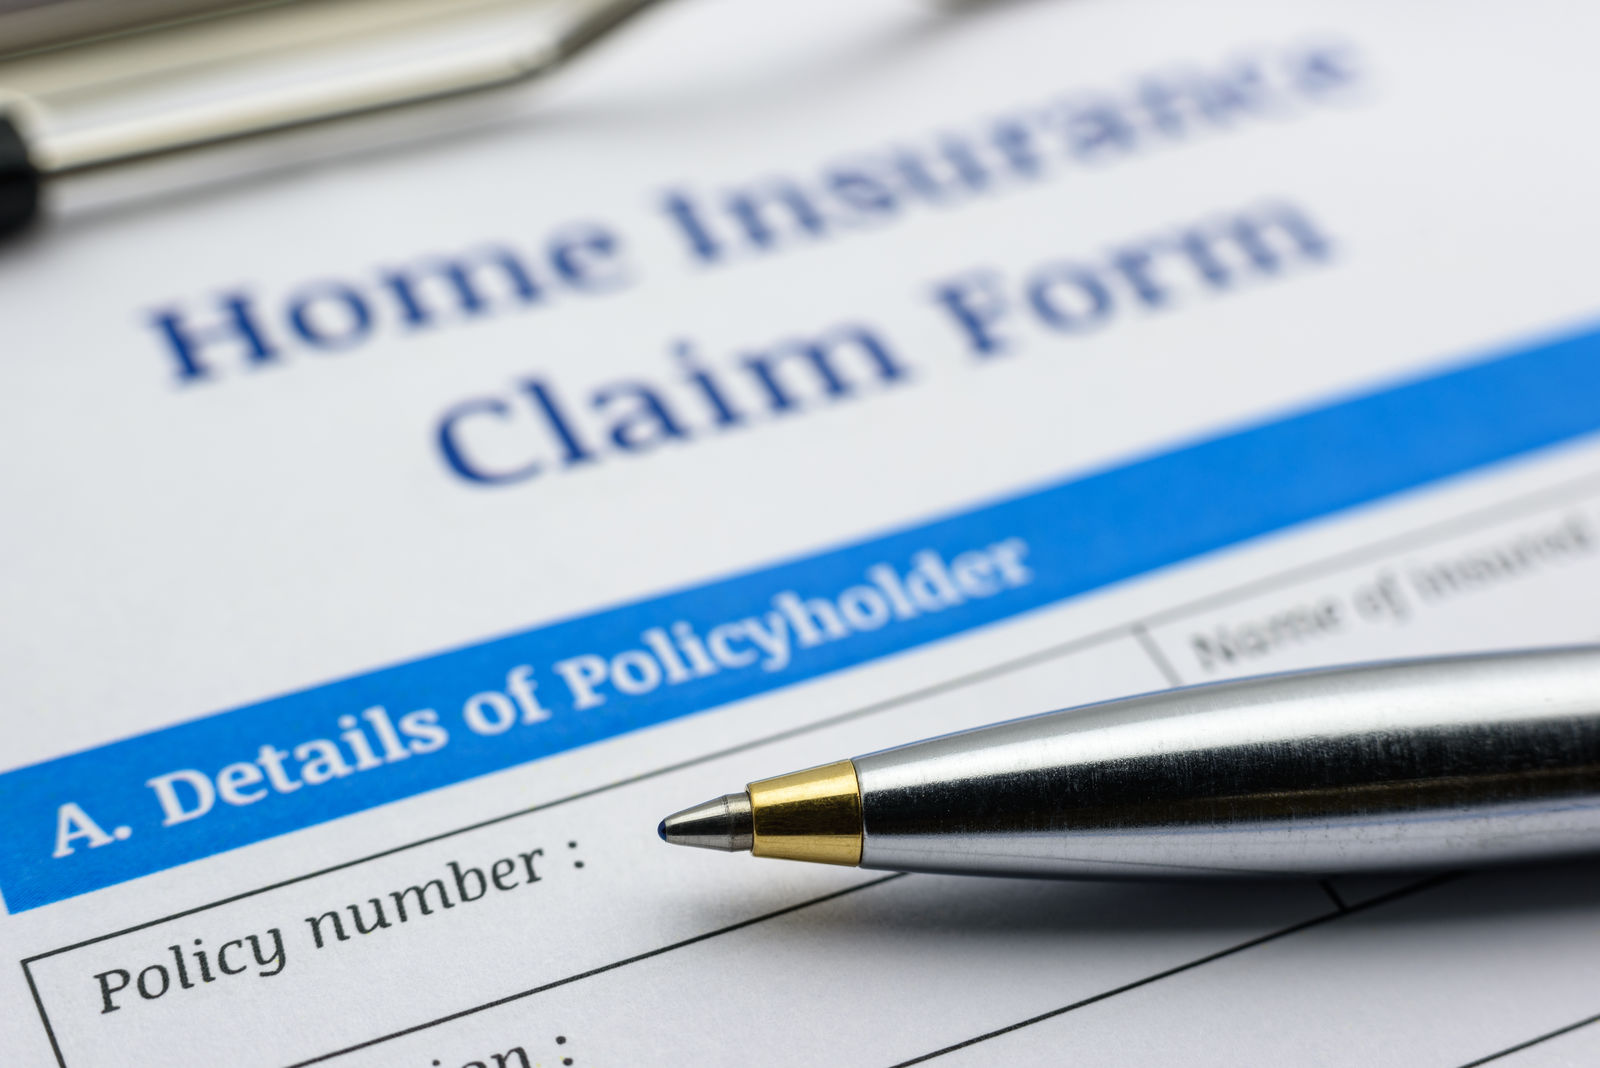 3 WAYS THINKING LIKE AN INSURANCE ADJUSTER GETS CLAIMS PAID